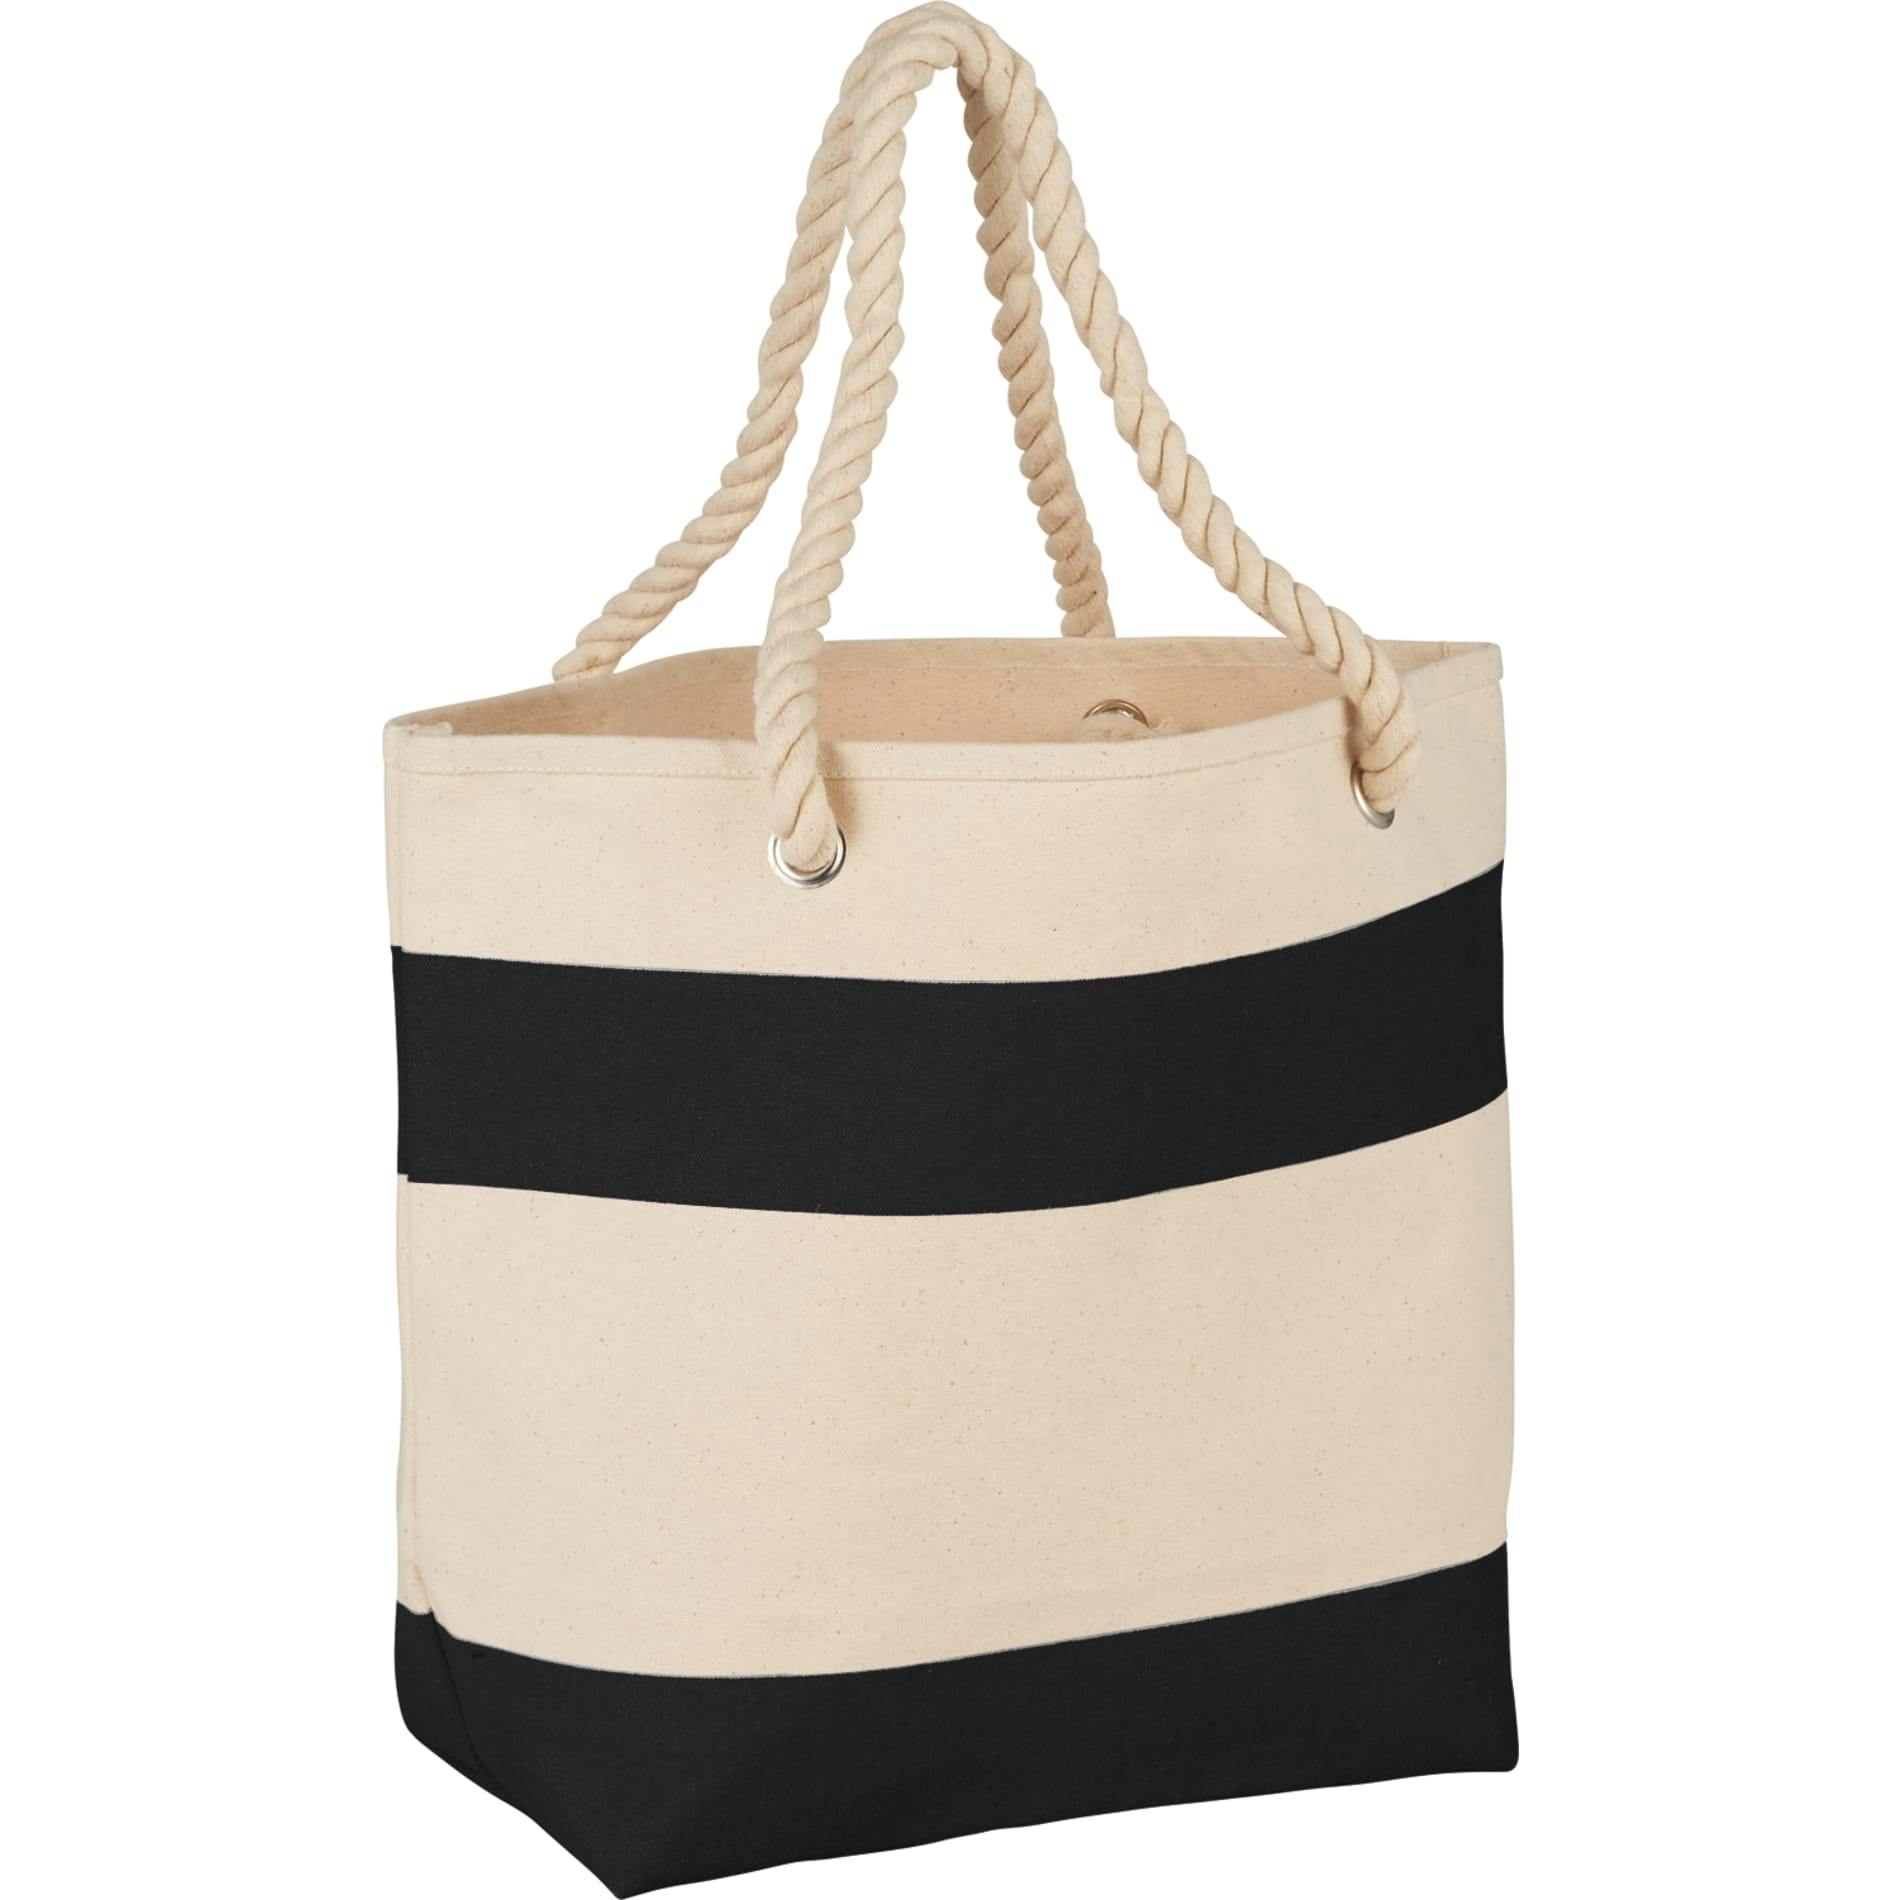 Rope Handle 16oz Cotton Canvas Tote - additional Image 2